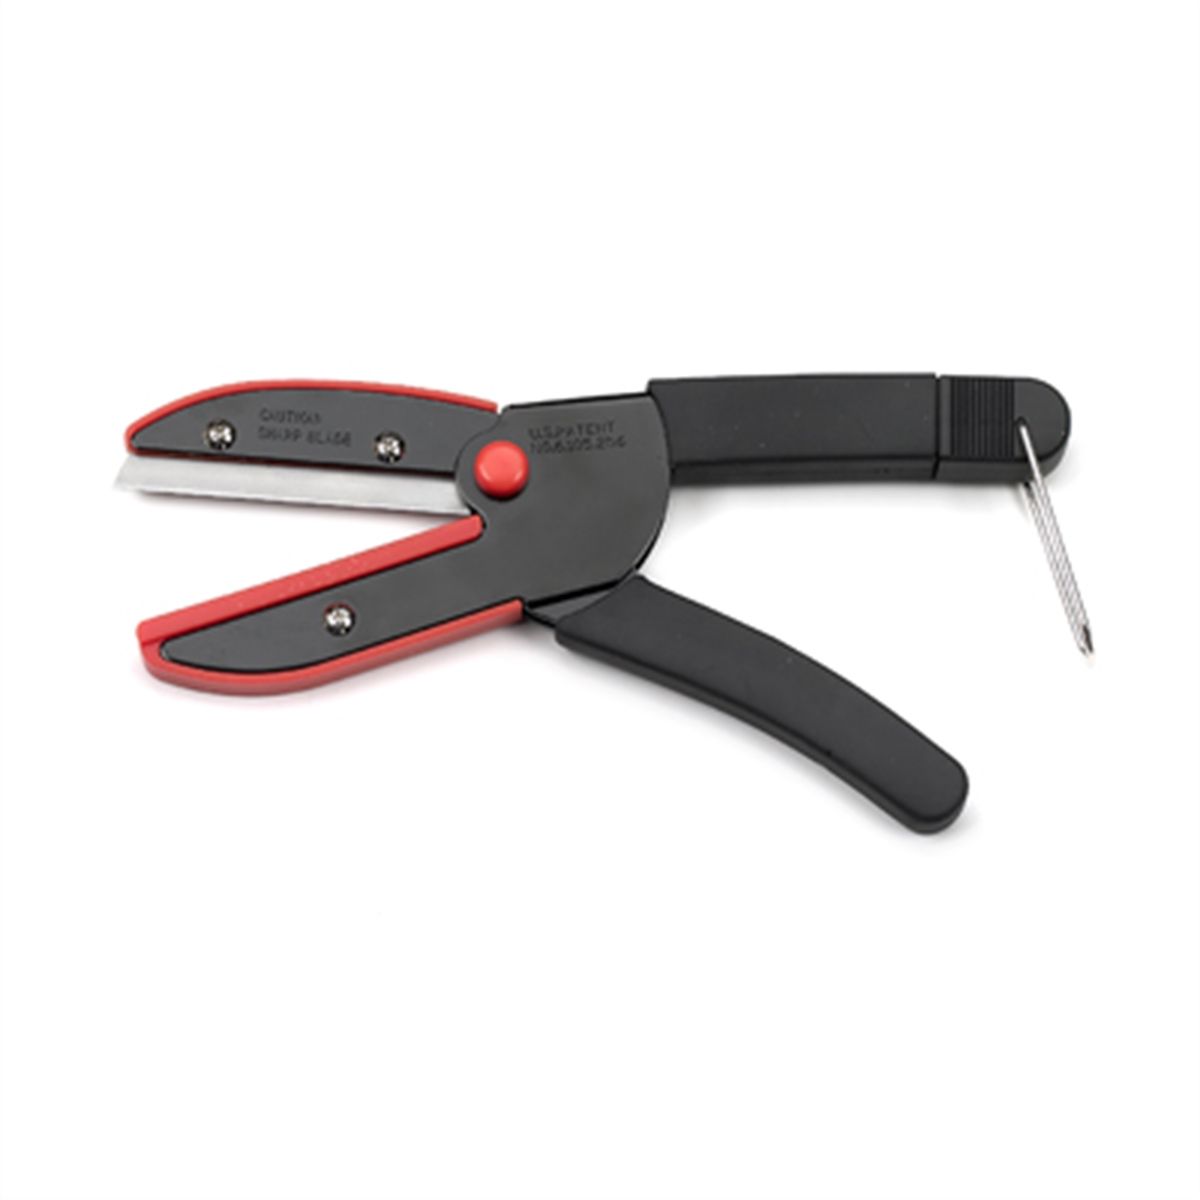 10" Univeral Cutting Pliers